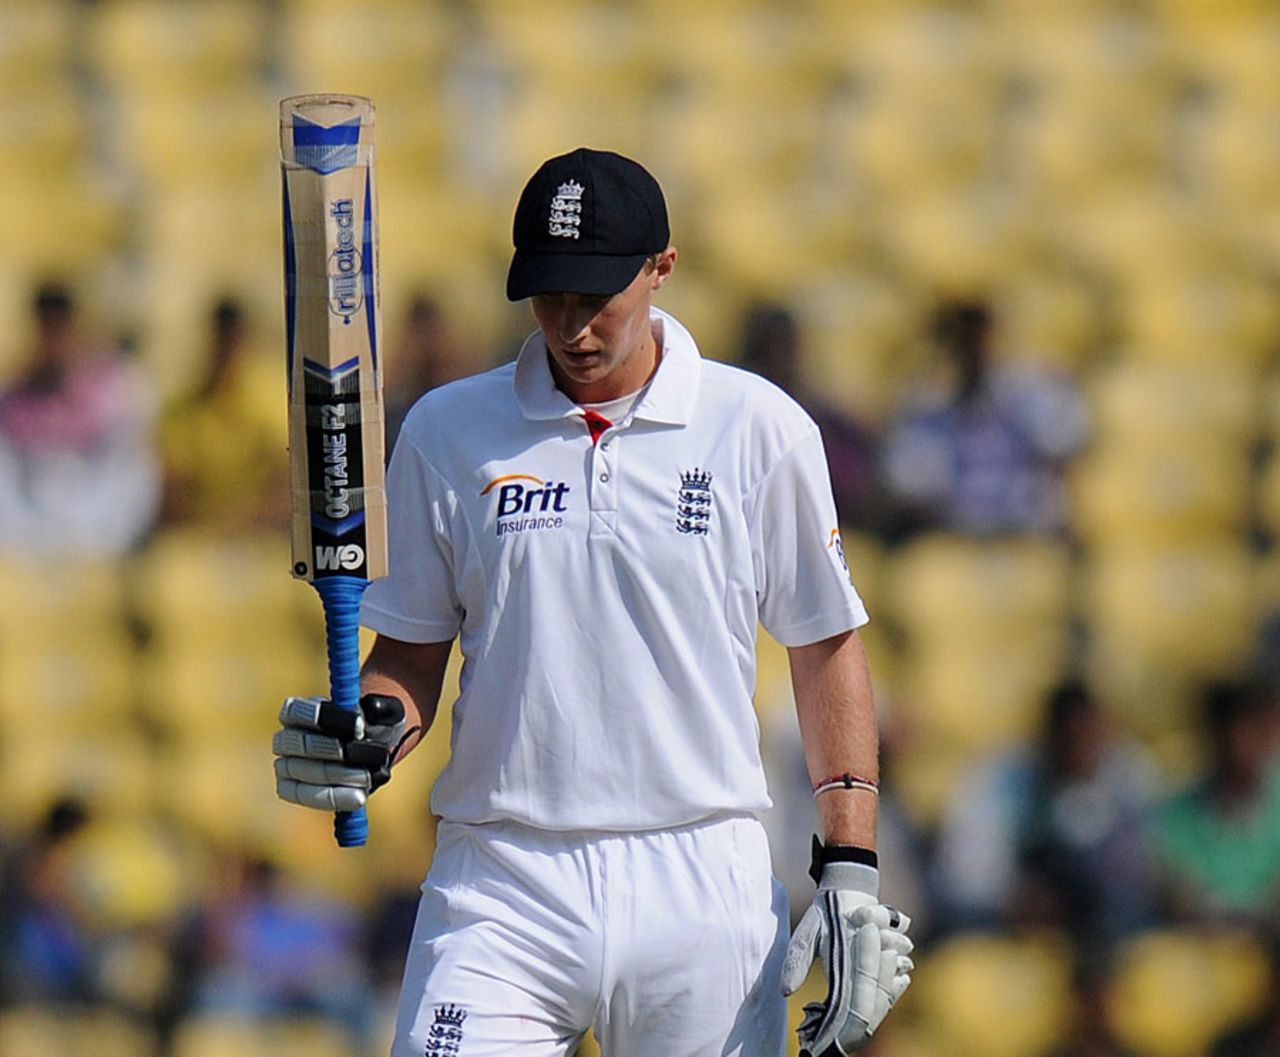 Joe Root acknowledges his debut fifty, India v England, 4th Test, Nagpur, 2nd day, December 14, 2012